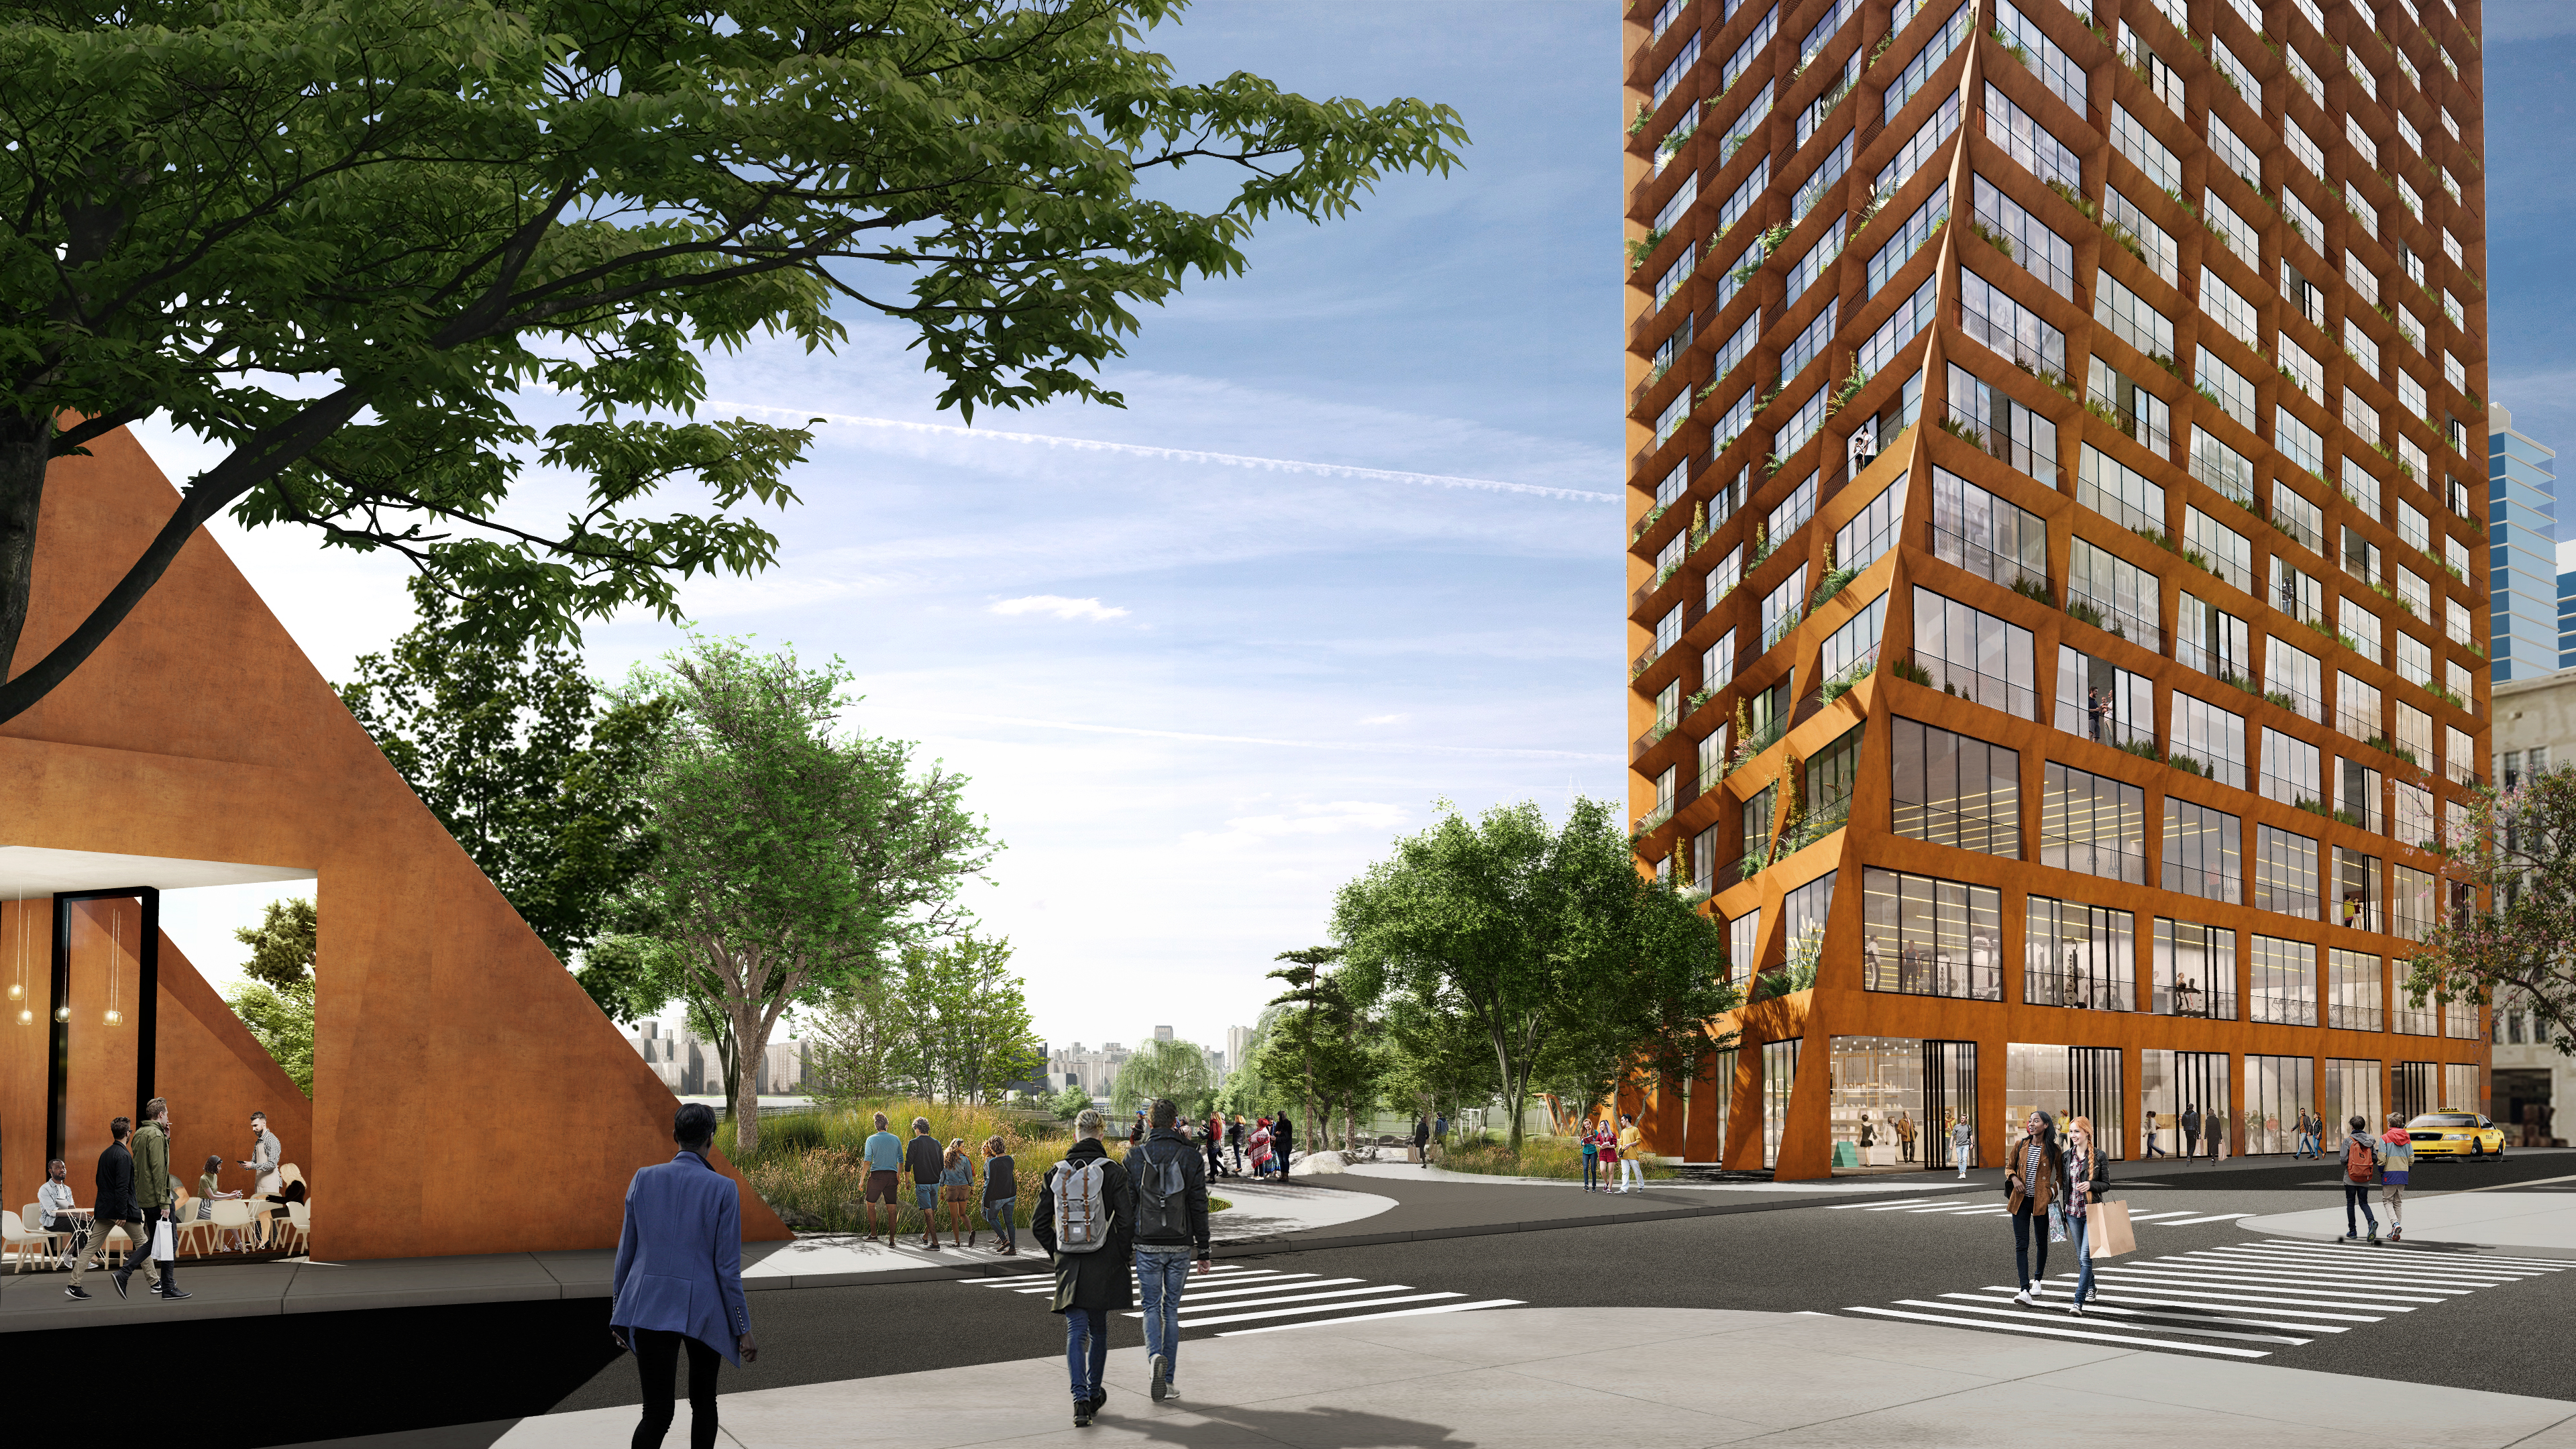 Here’s a street-level look at the proposed River Street development’s two apartment buildings. Rendering by James Corner Field Operations and BIG-Bjarke Ingels Group courtesy of Two Trees Management